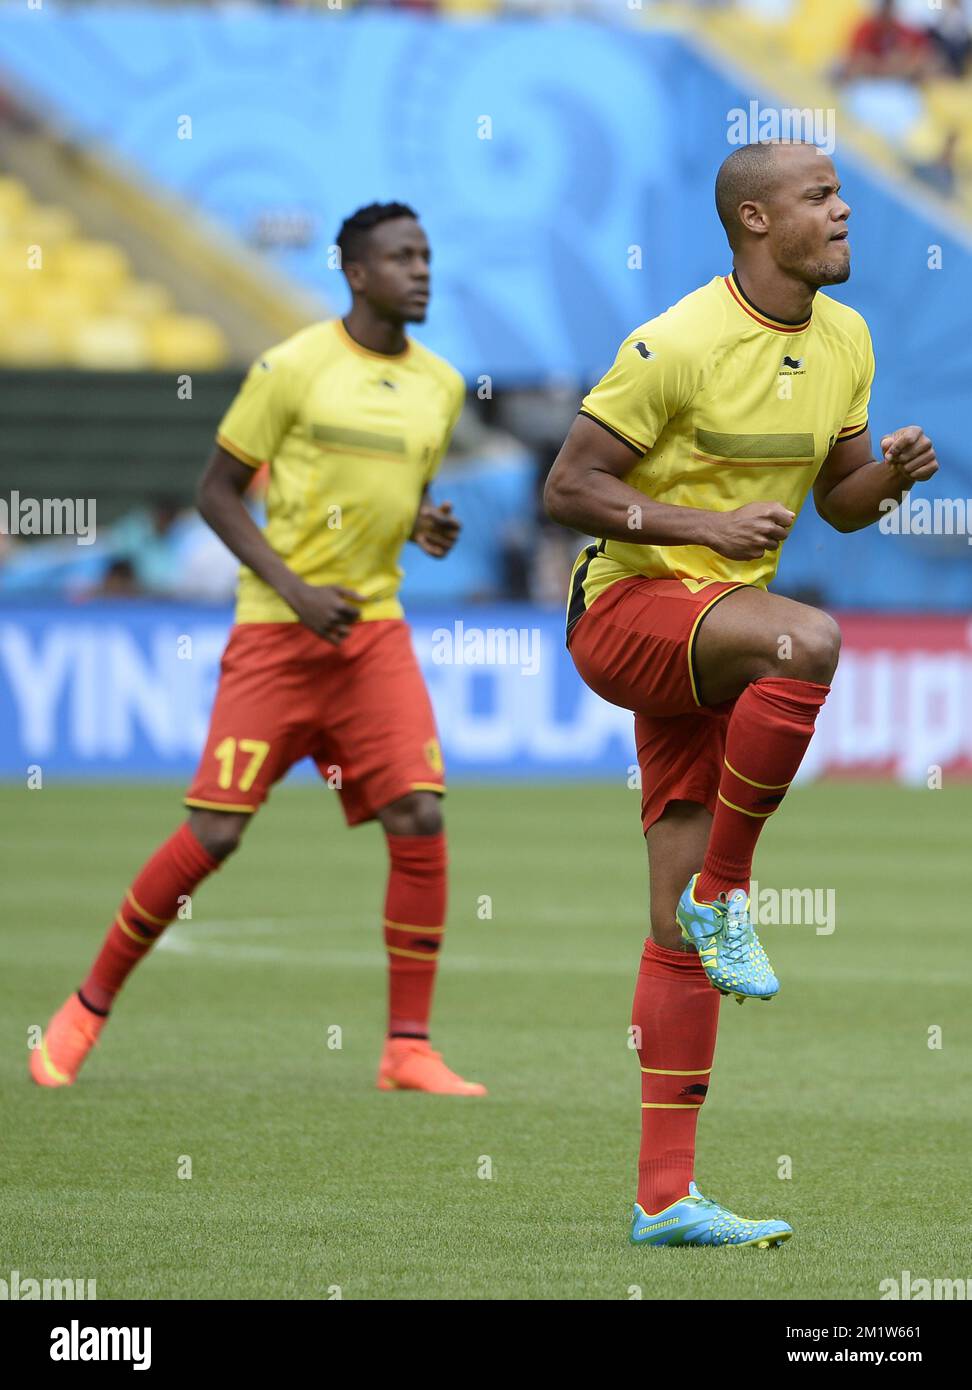 20140622 - RIO DE JANEIRO, BRAZIL: Belgium's Divock Origi and Belgium's Vincent Kompany pictured ahead of a soccer game between Belgian national team The Red Devils and Russia in Rio de Janeiro, Brazil, the second game in Group H of the first round of the 2014 FIFA World Cup, Sunday 22 June 2014. BELGA PHOTO DIRK WAEM Stock Photo